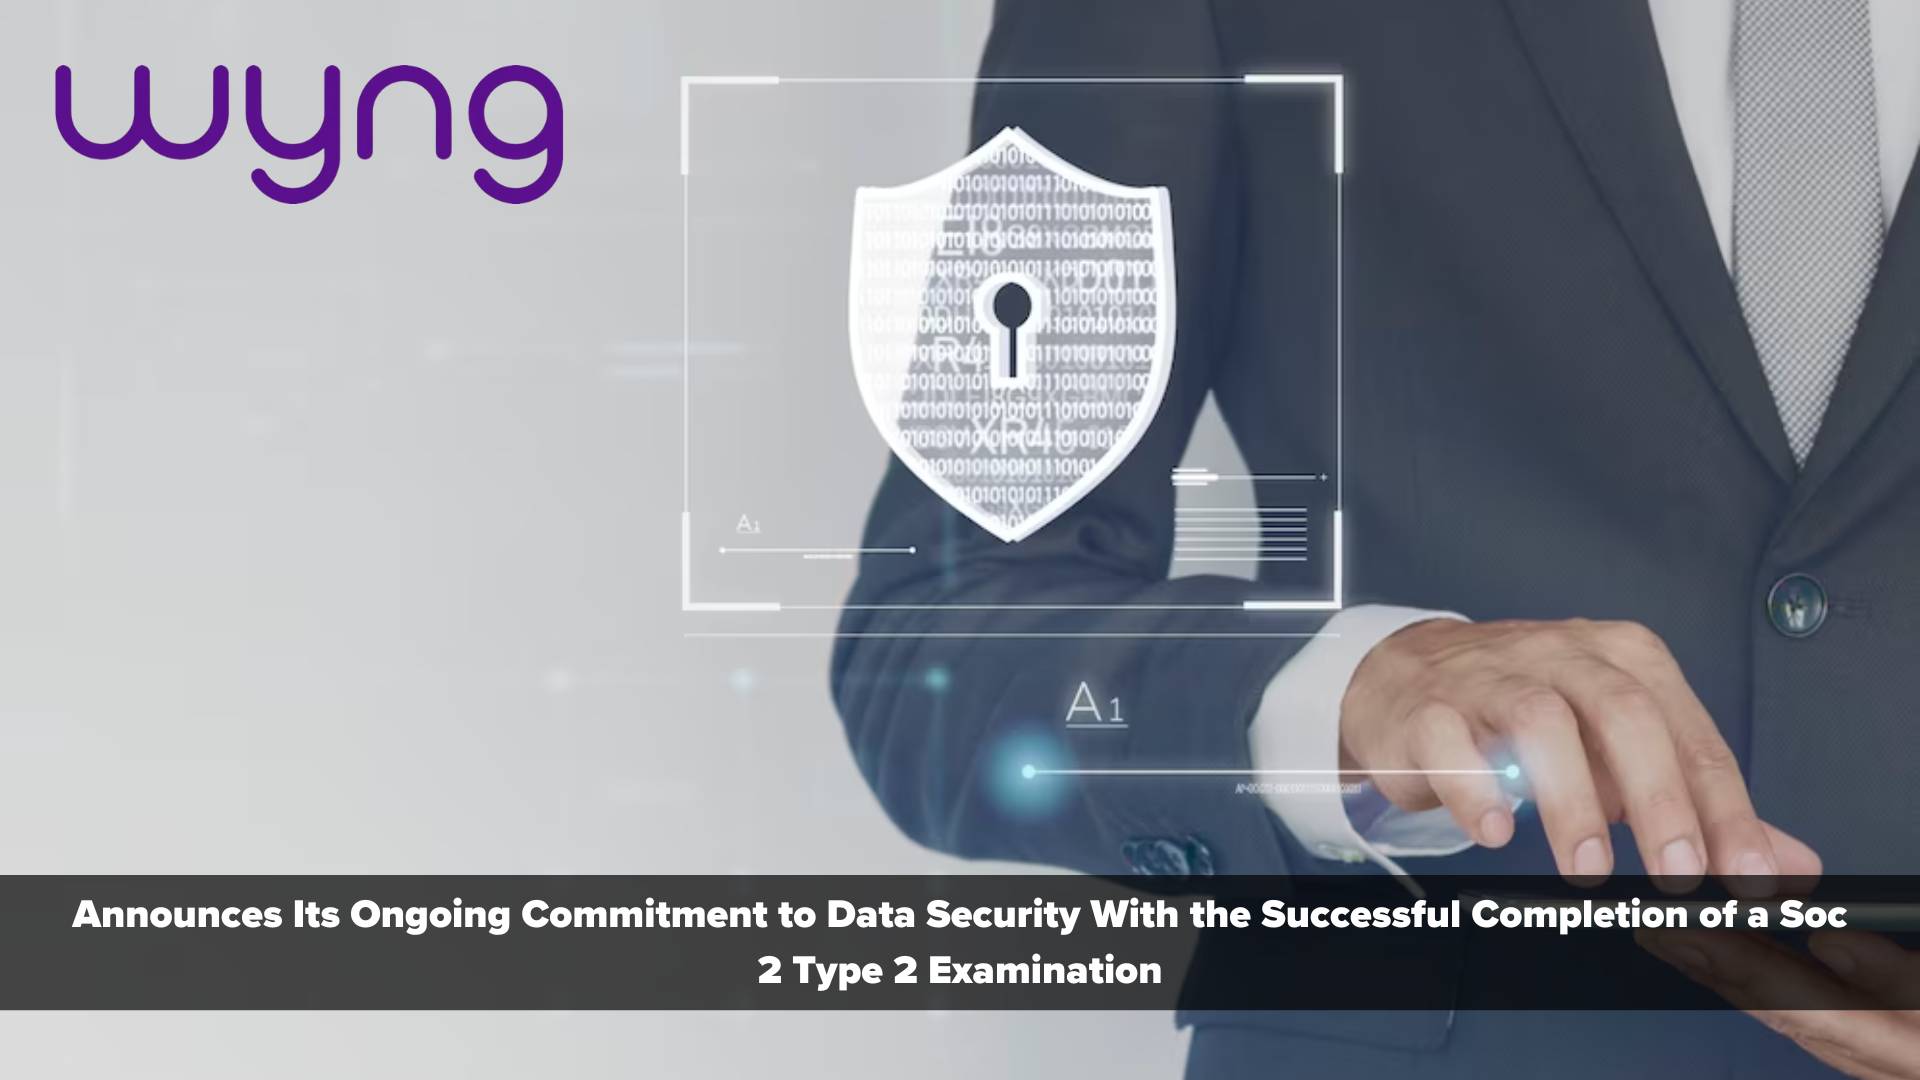 Wyng Boosts Security Posture with Successful Completion of SOC 2 Type 2 Examination